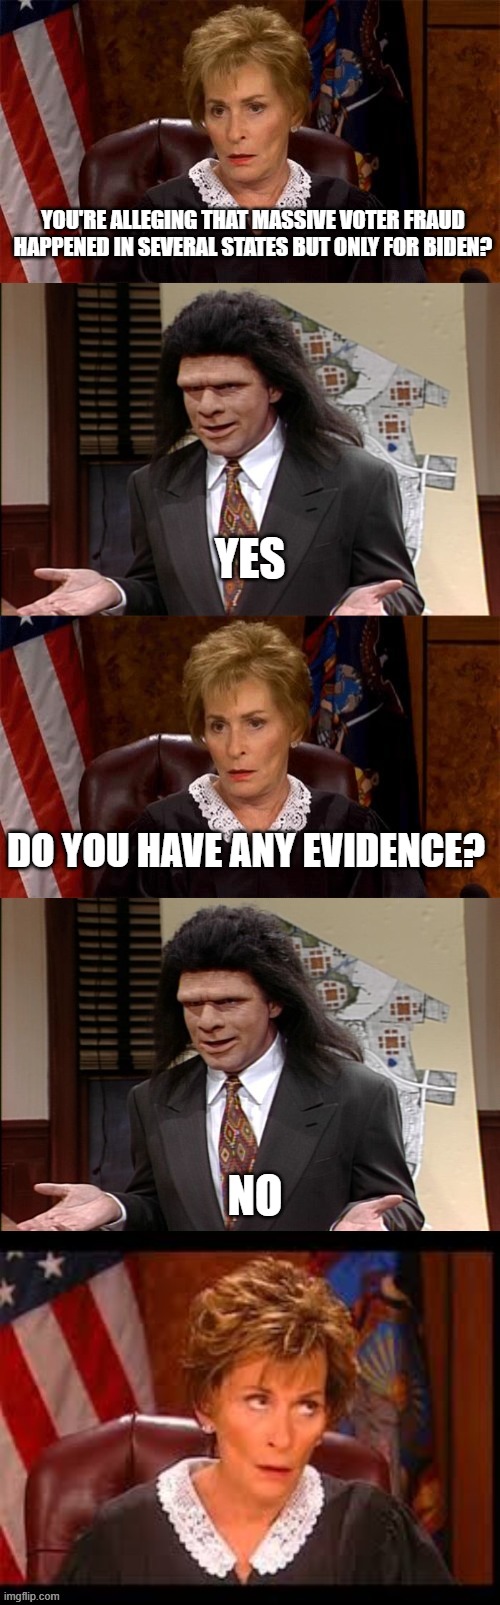 More 4 Seasons Total Lawyering | YOU'RE ALLEGING THAT MASSIVE VOTER FRAUD HAPPENED IN SEVERAL STATES BUT ONLY FOR BIDEN? YES; DO YOU HAVE ANY EVIDENCE? NO | image tagged in judge v lawyer | made w/ Imgflip meme maker